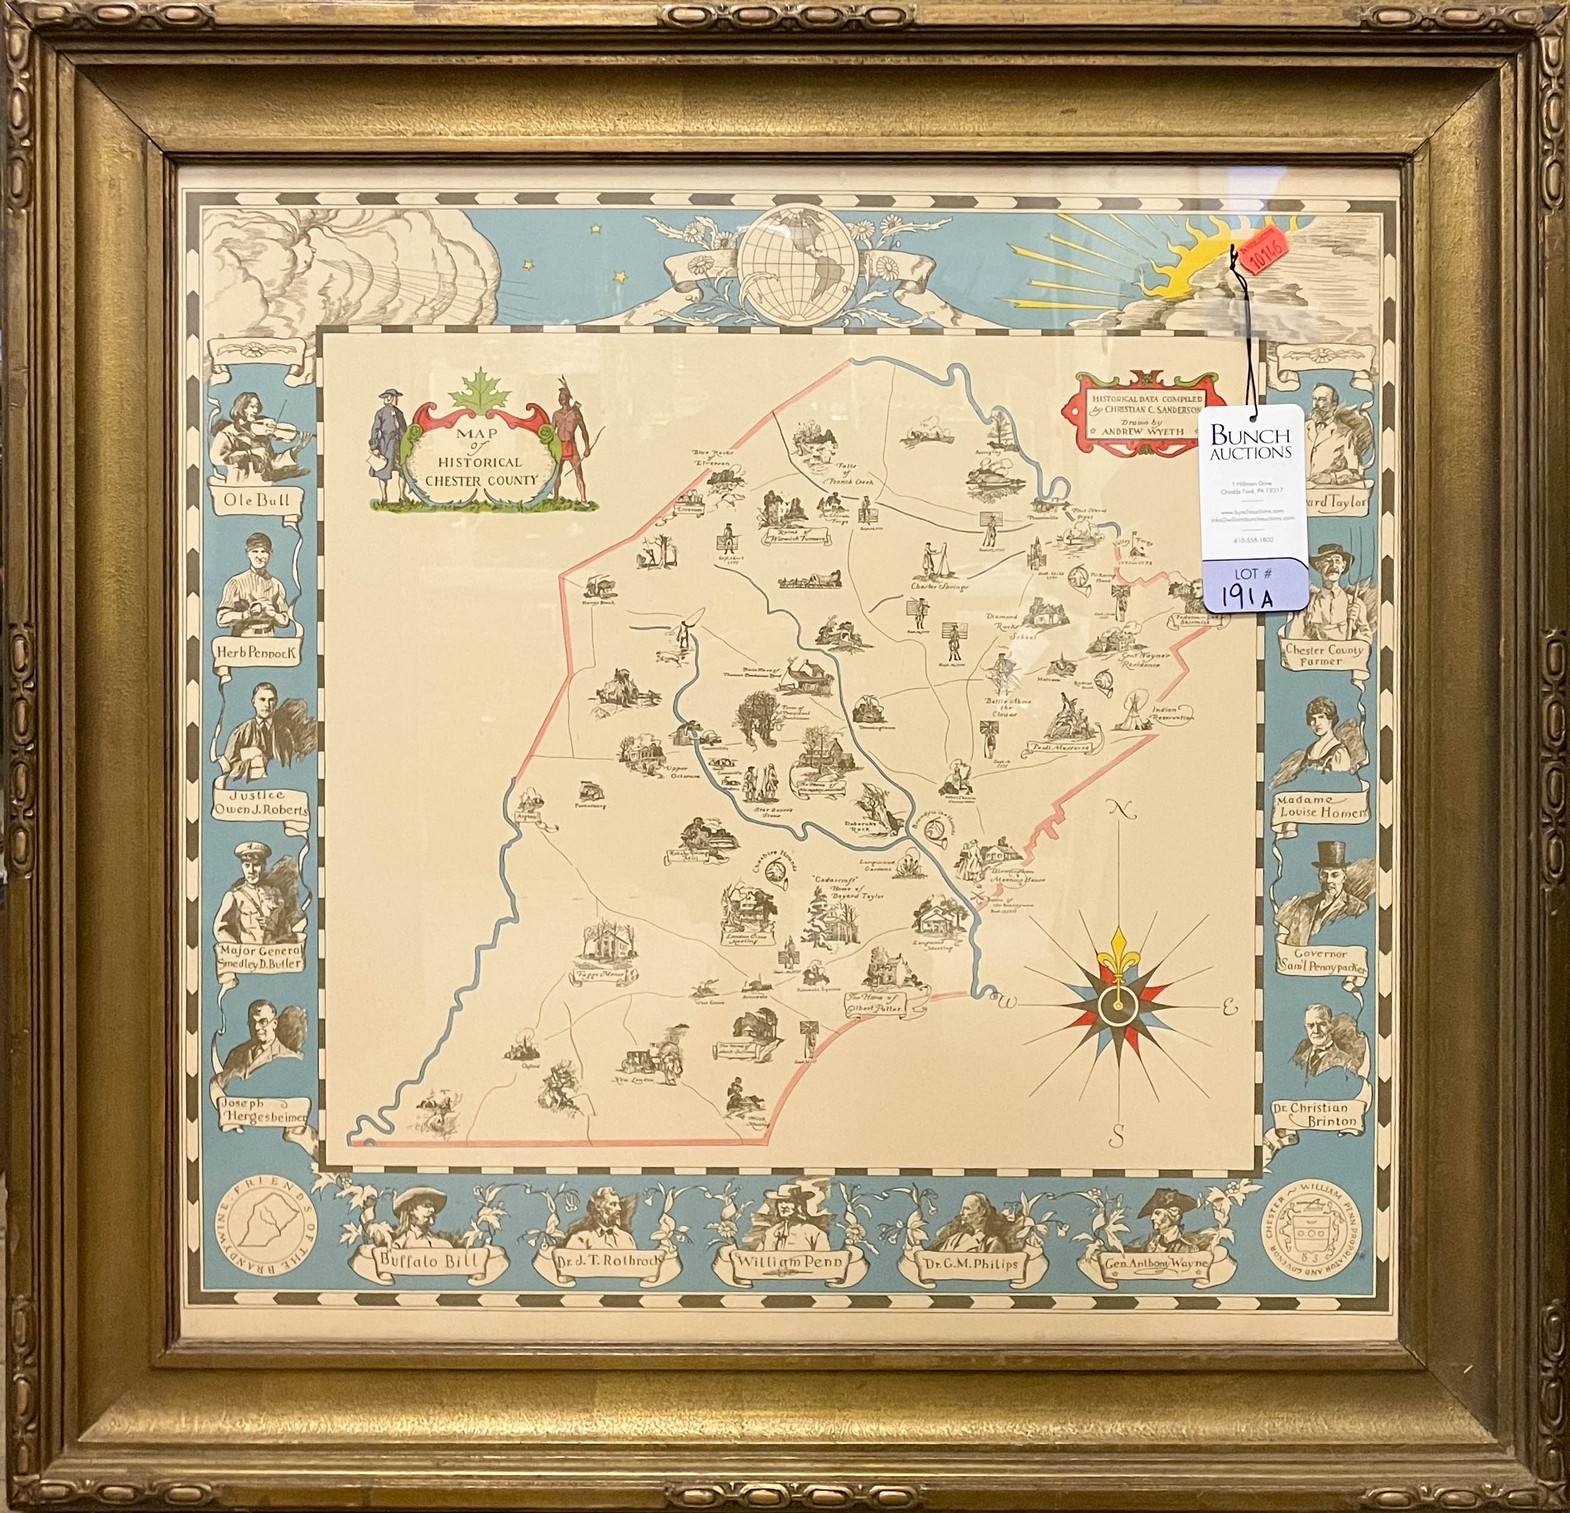 A framed map of historical Chester County,